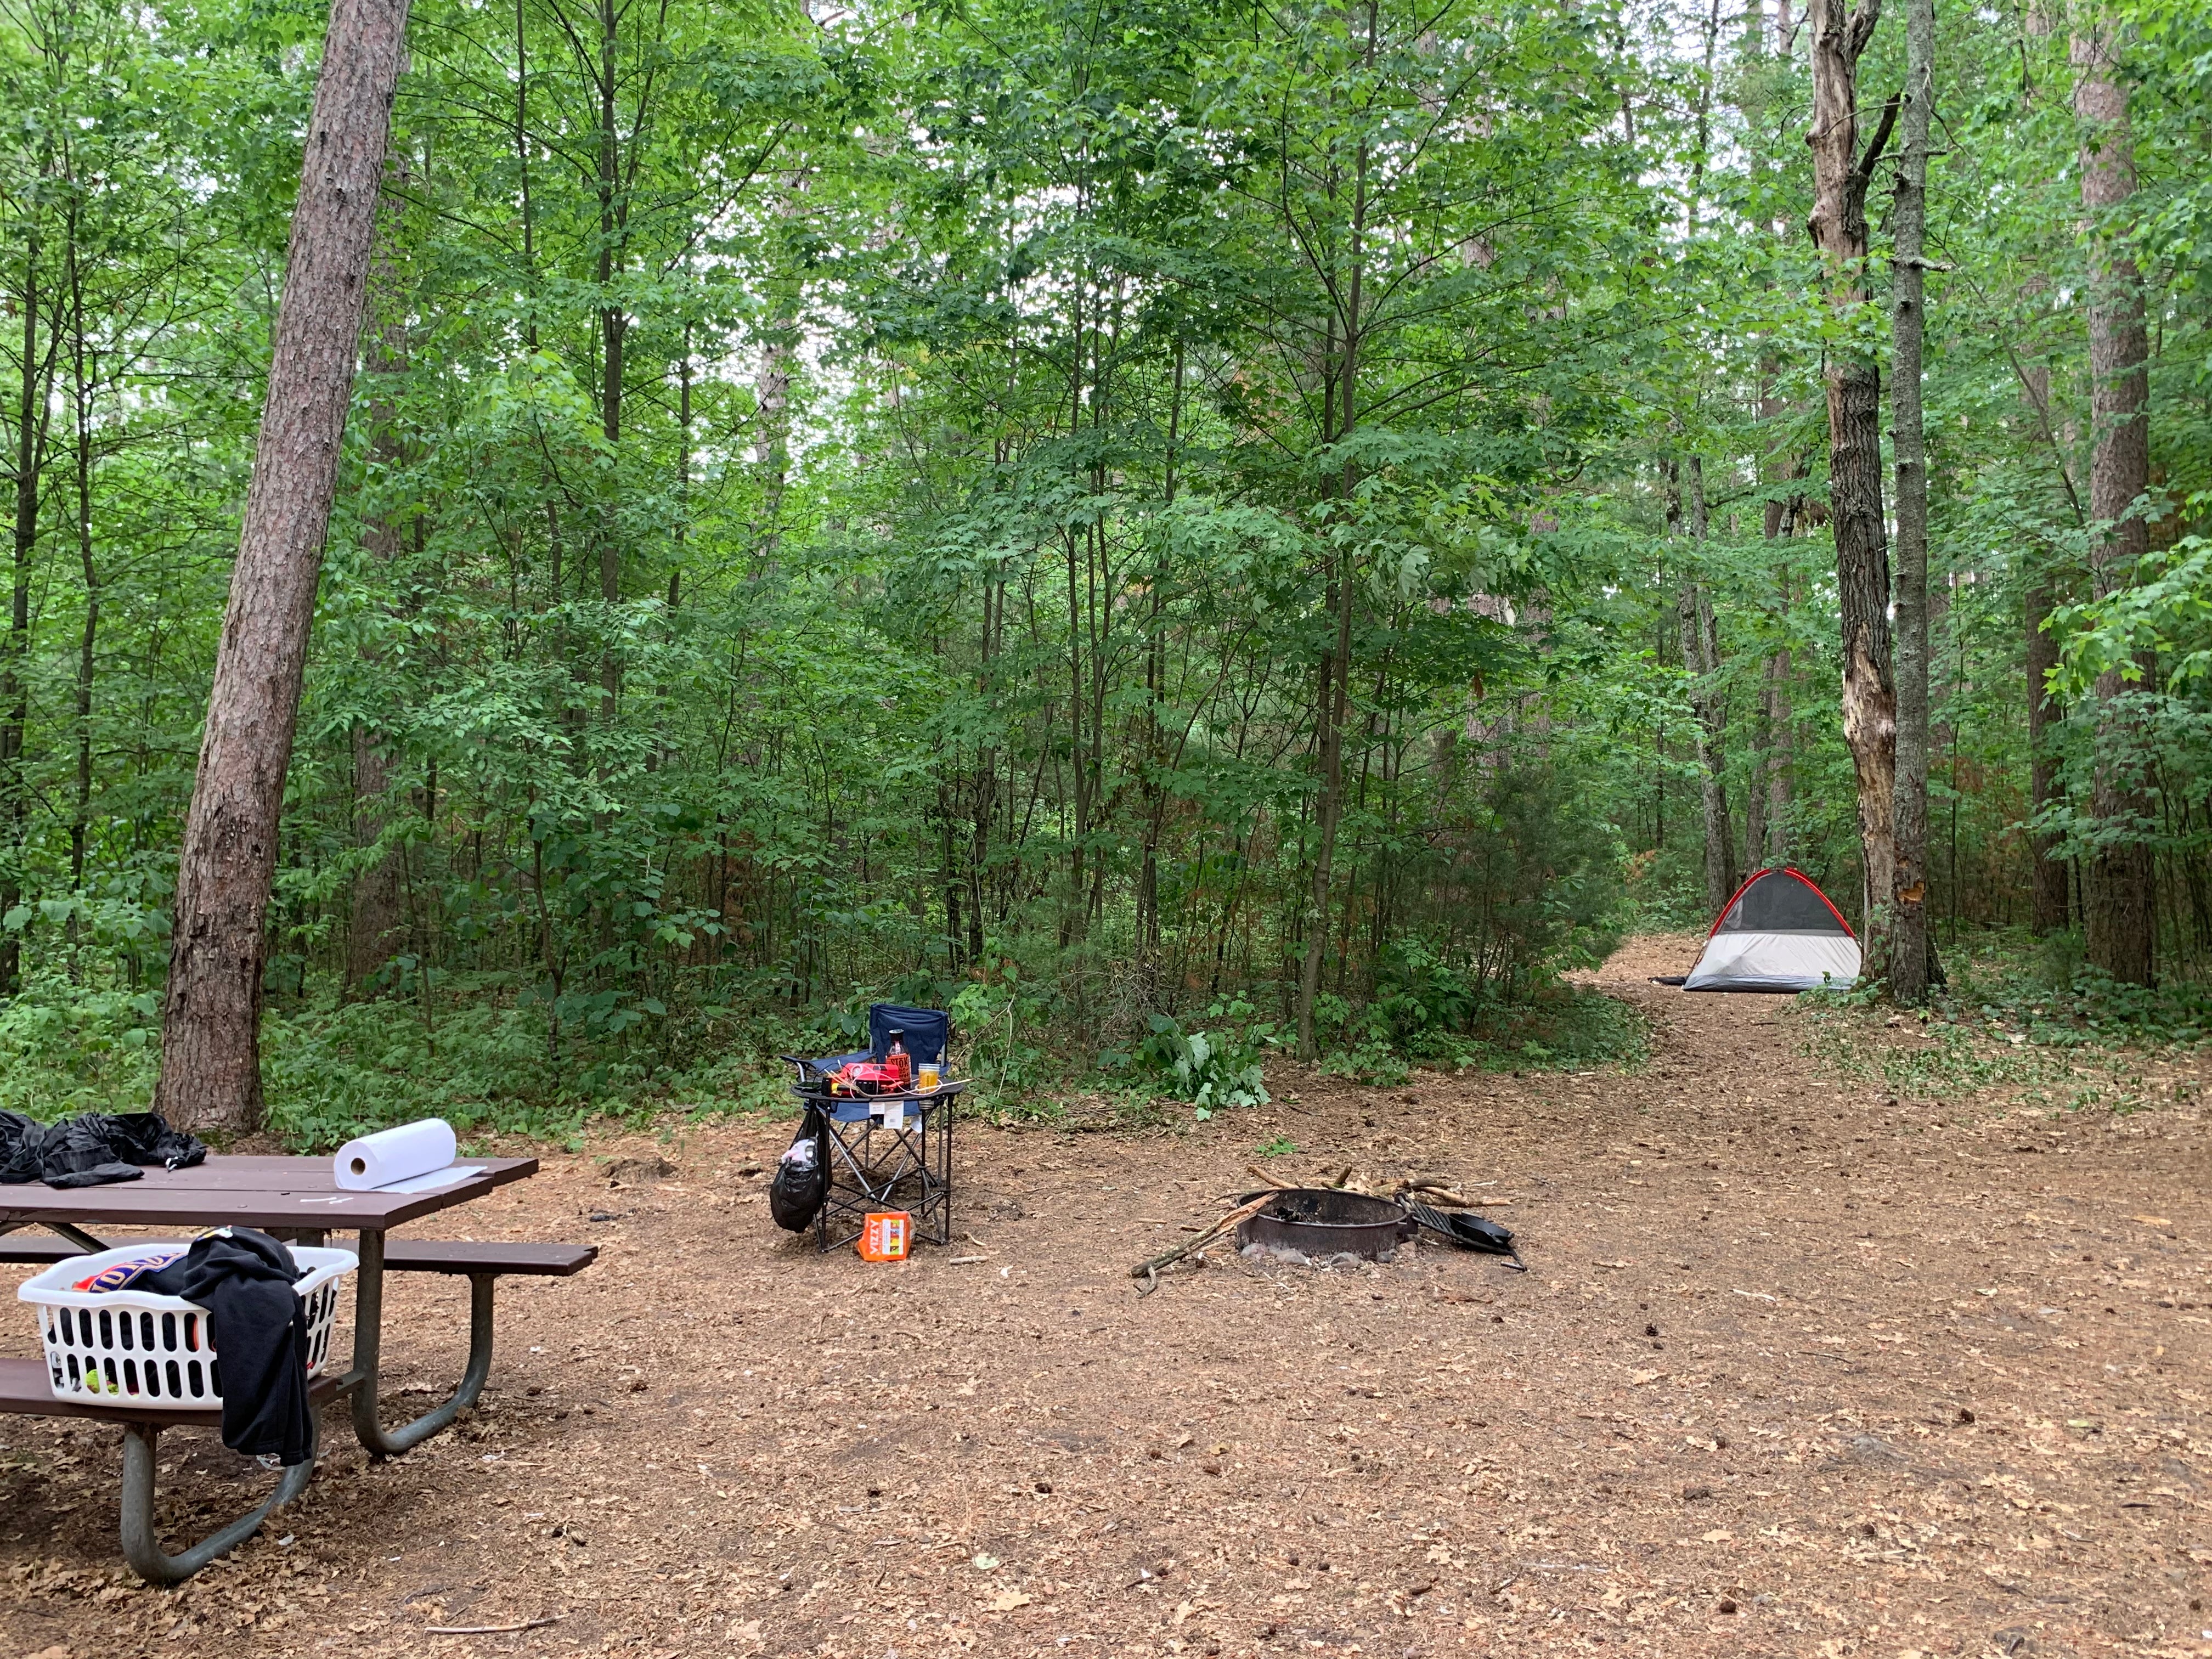 Camper submitted image from Sandrock Cliffs — Saint Croix National Scenic Riverway - 2